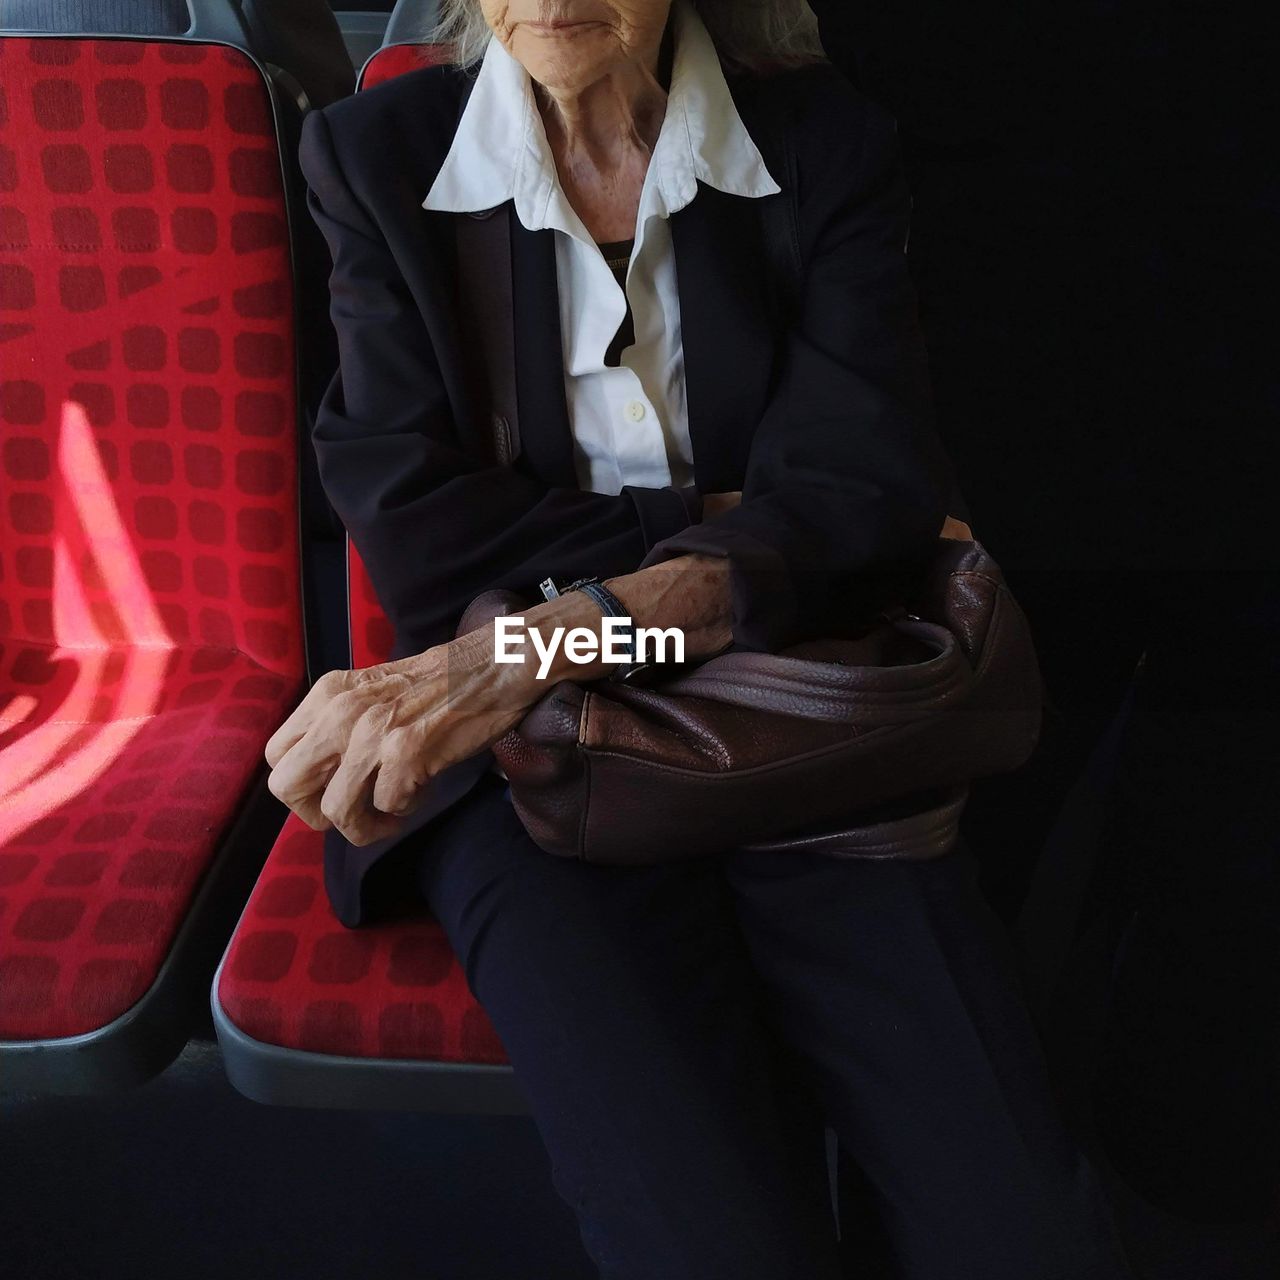 Old fashion lady in the bus with white collar and costume